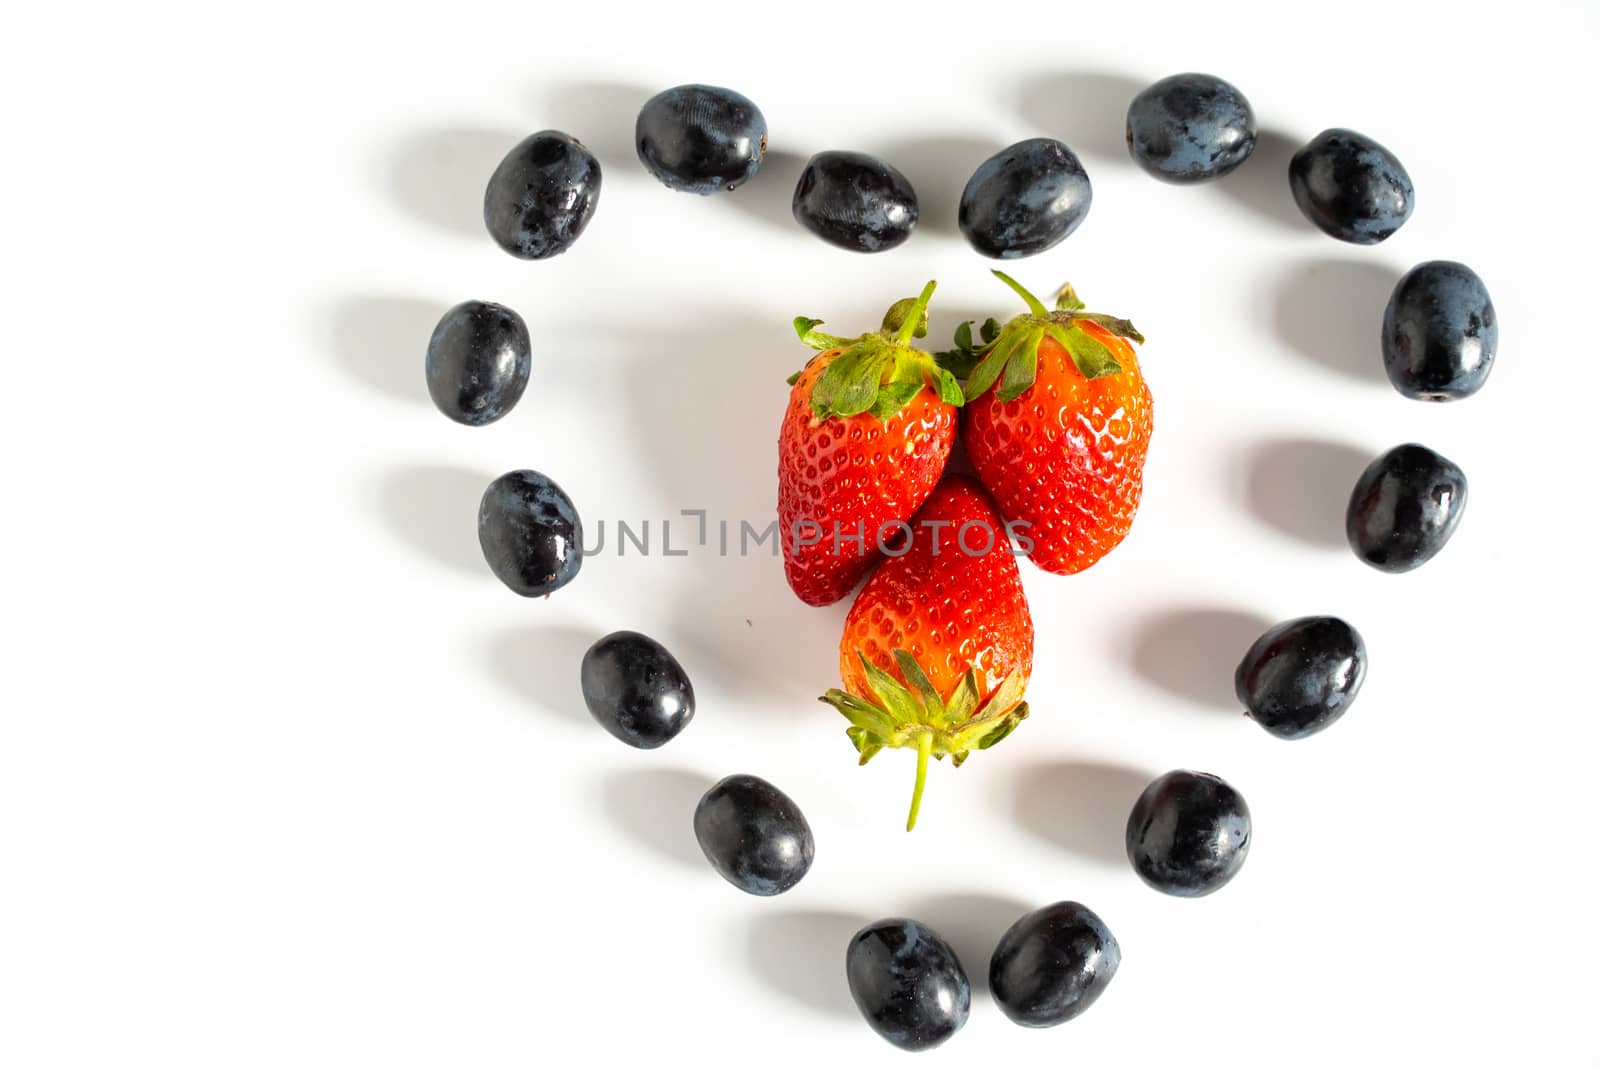 Three strawberries in the center of a heart shape pattern of black grapes